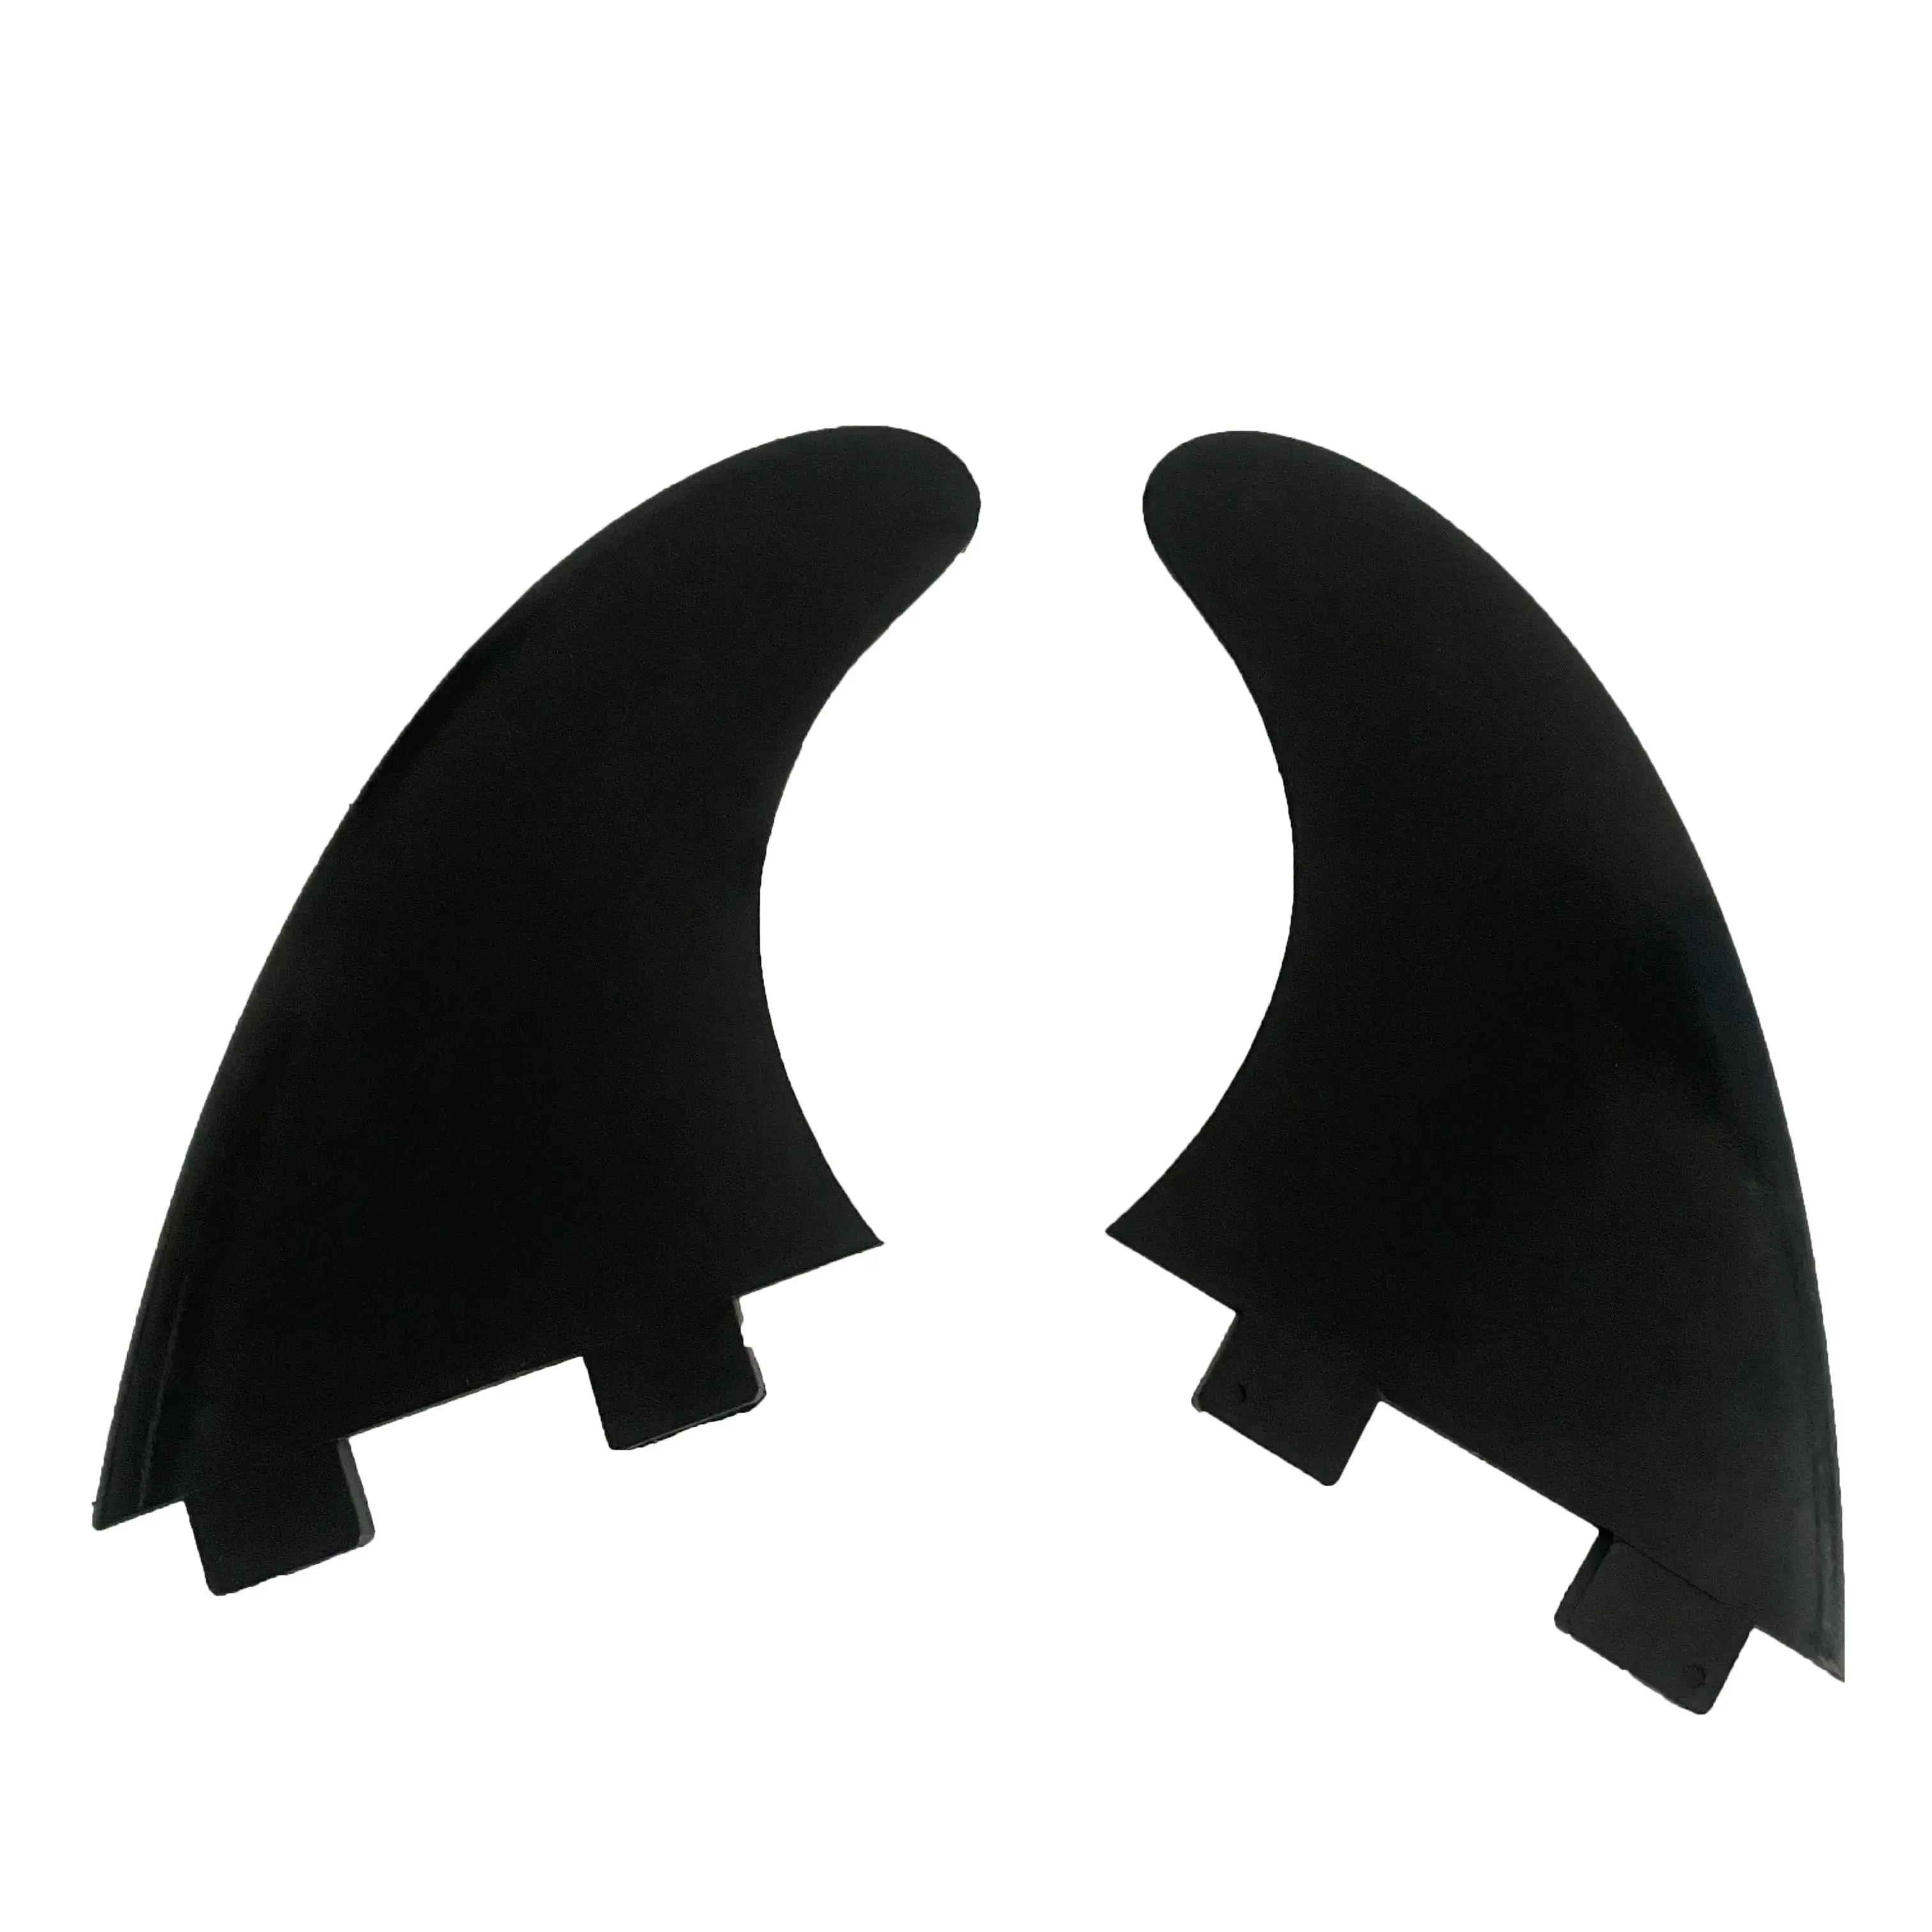 2 Pcs G5 Surfboard Fins SUP Accessory Surf Fin Paddle Board Fin surfboard paddleboard fin replacement inflatable sup stand up paddle board accessory lock fins center fin for beginners pros